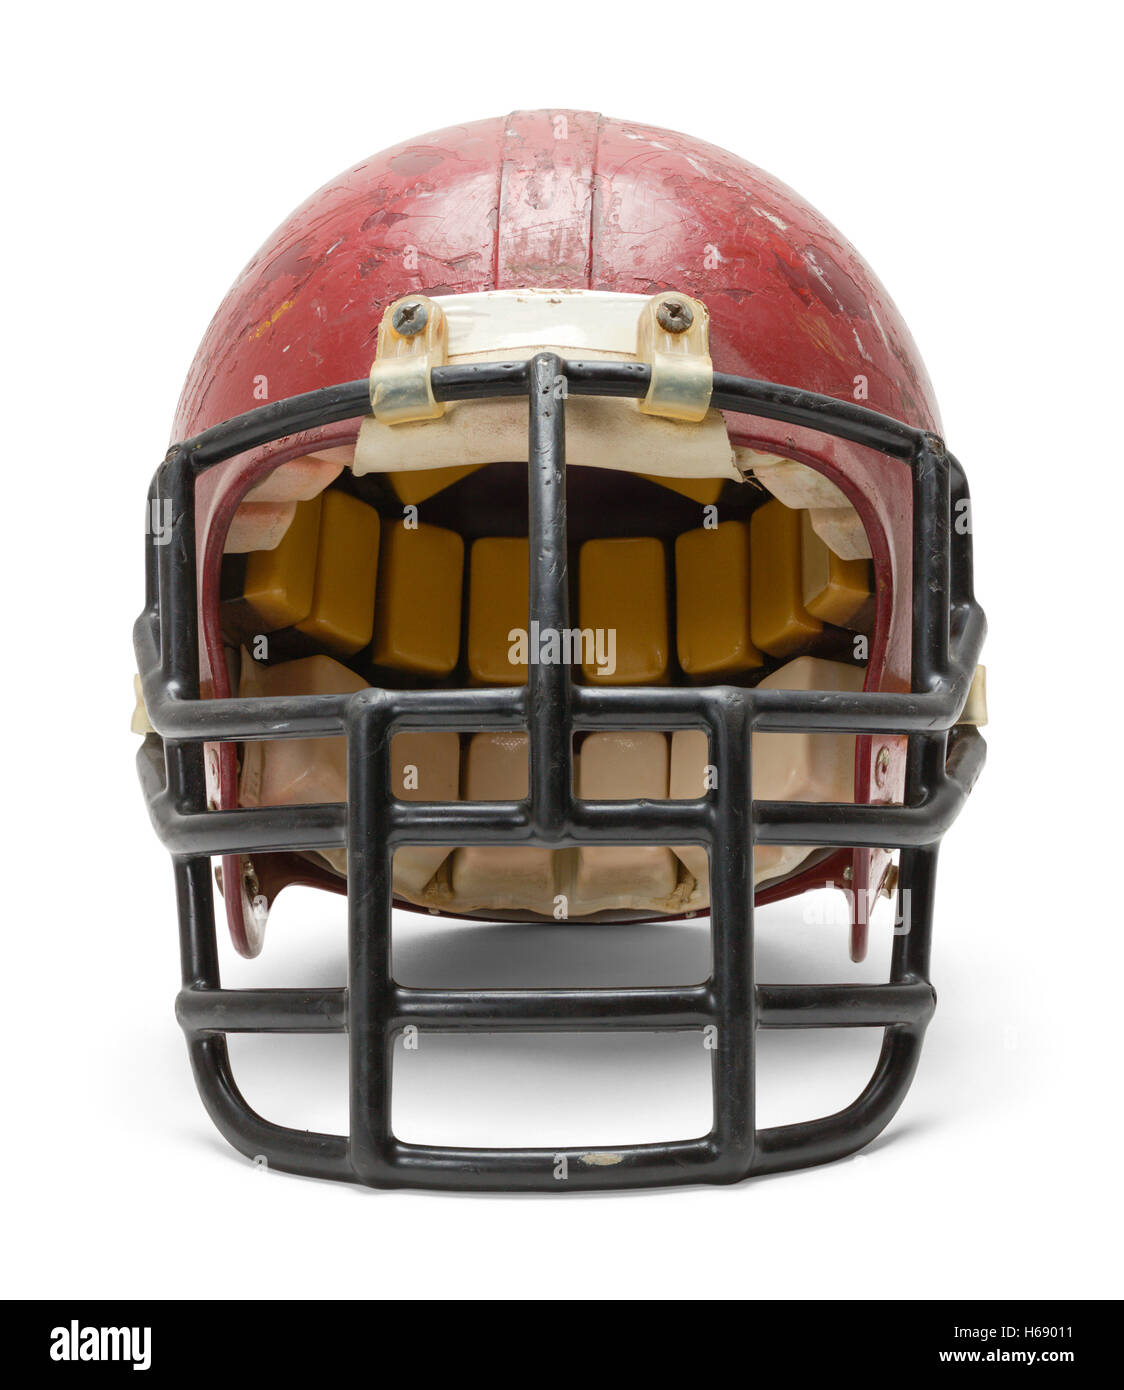 Front View of Old Football Helmet Isolated on White Background. Stock Photo